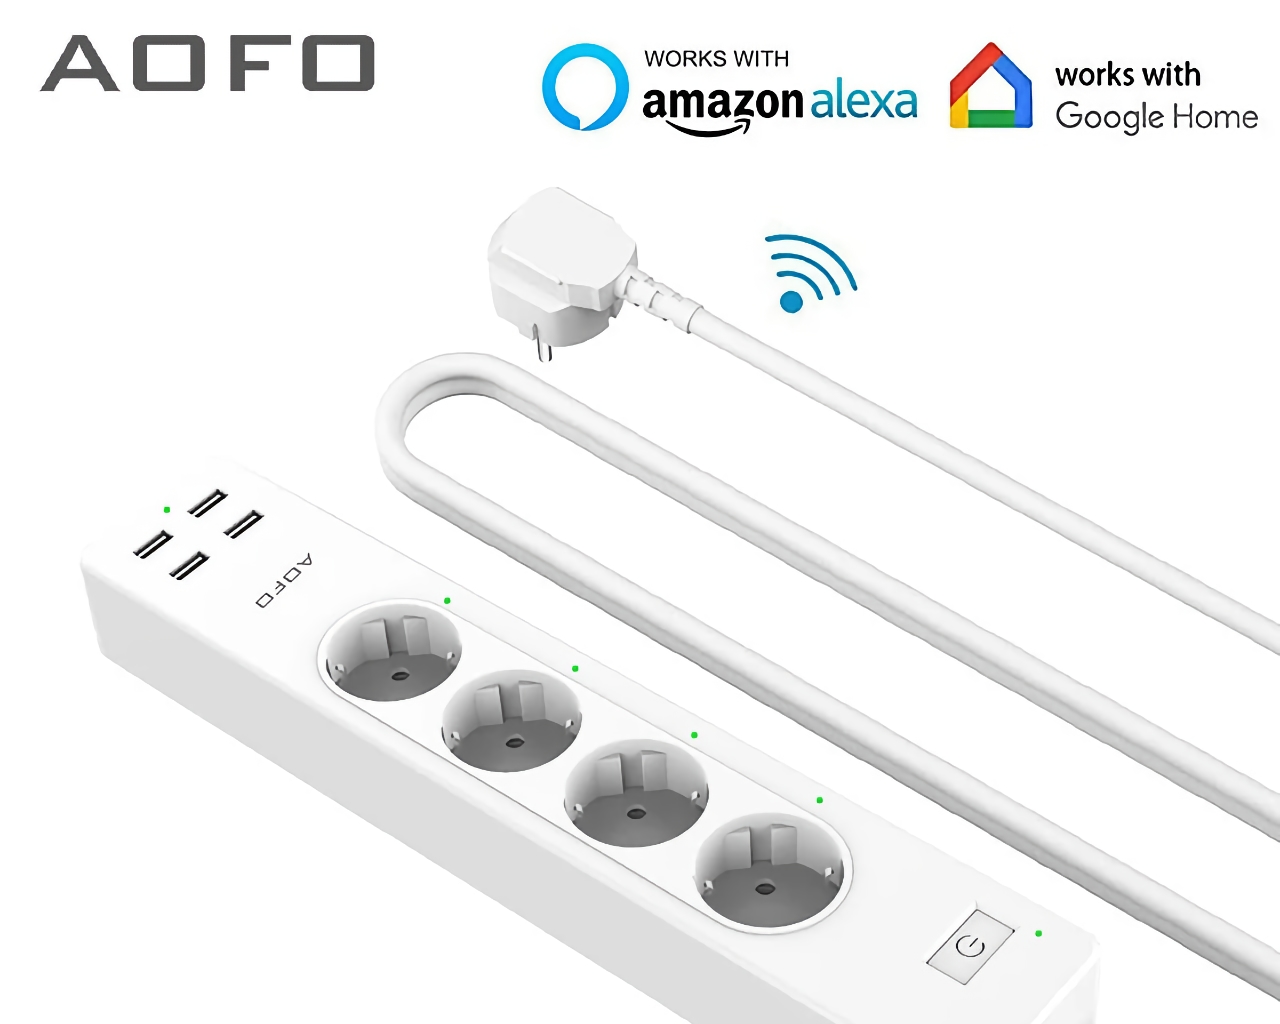 AOFO Smart Extender with 4 Outlets, USB Ports and Google Home Support for $ 31